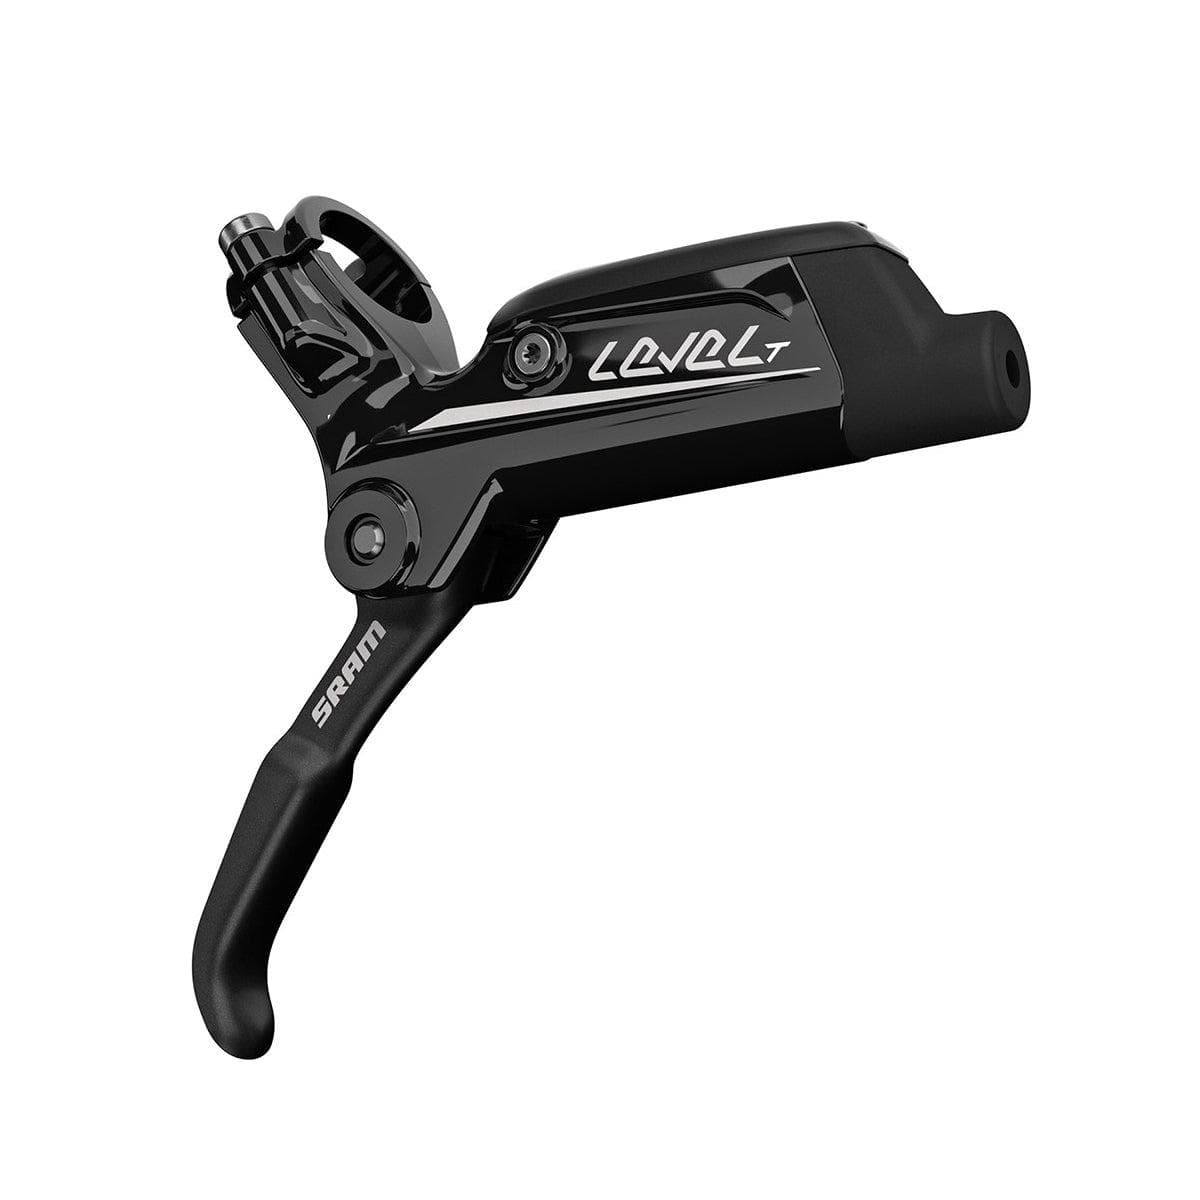 Sram Level T - Front 900Mm Hose - Gloss Black (Tooled) (Rotor/Bracket Sold Separately) A1: Black 900Mm